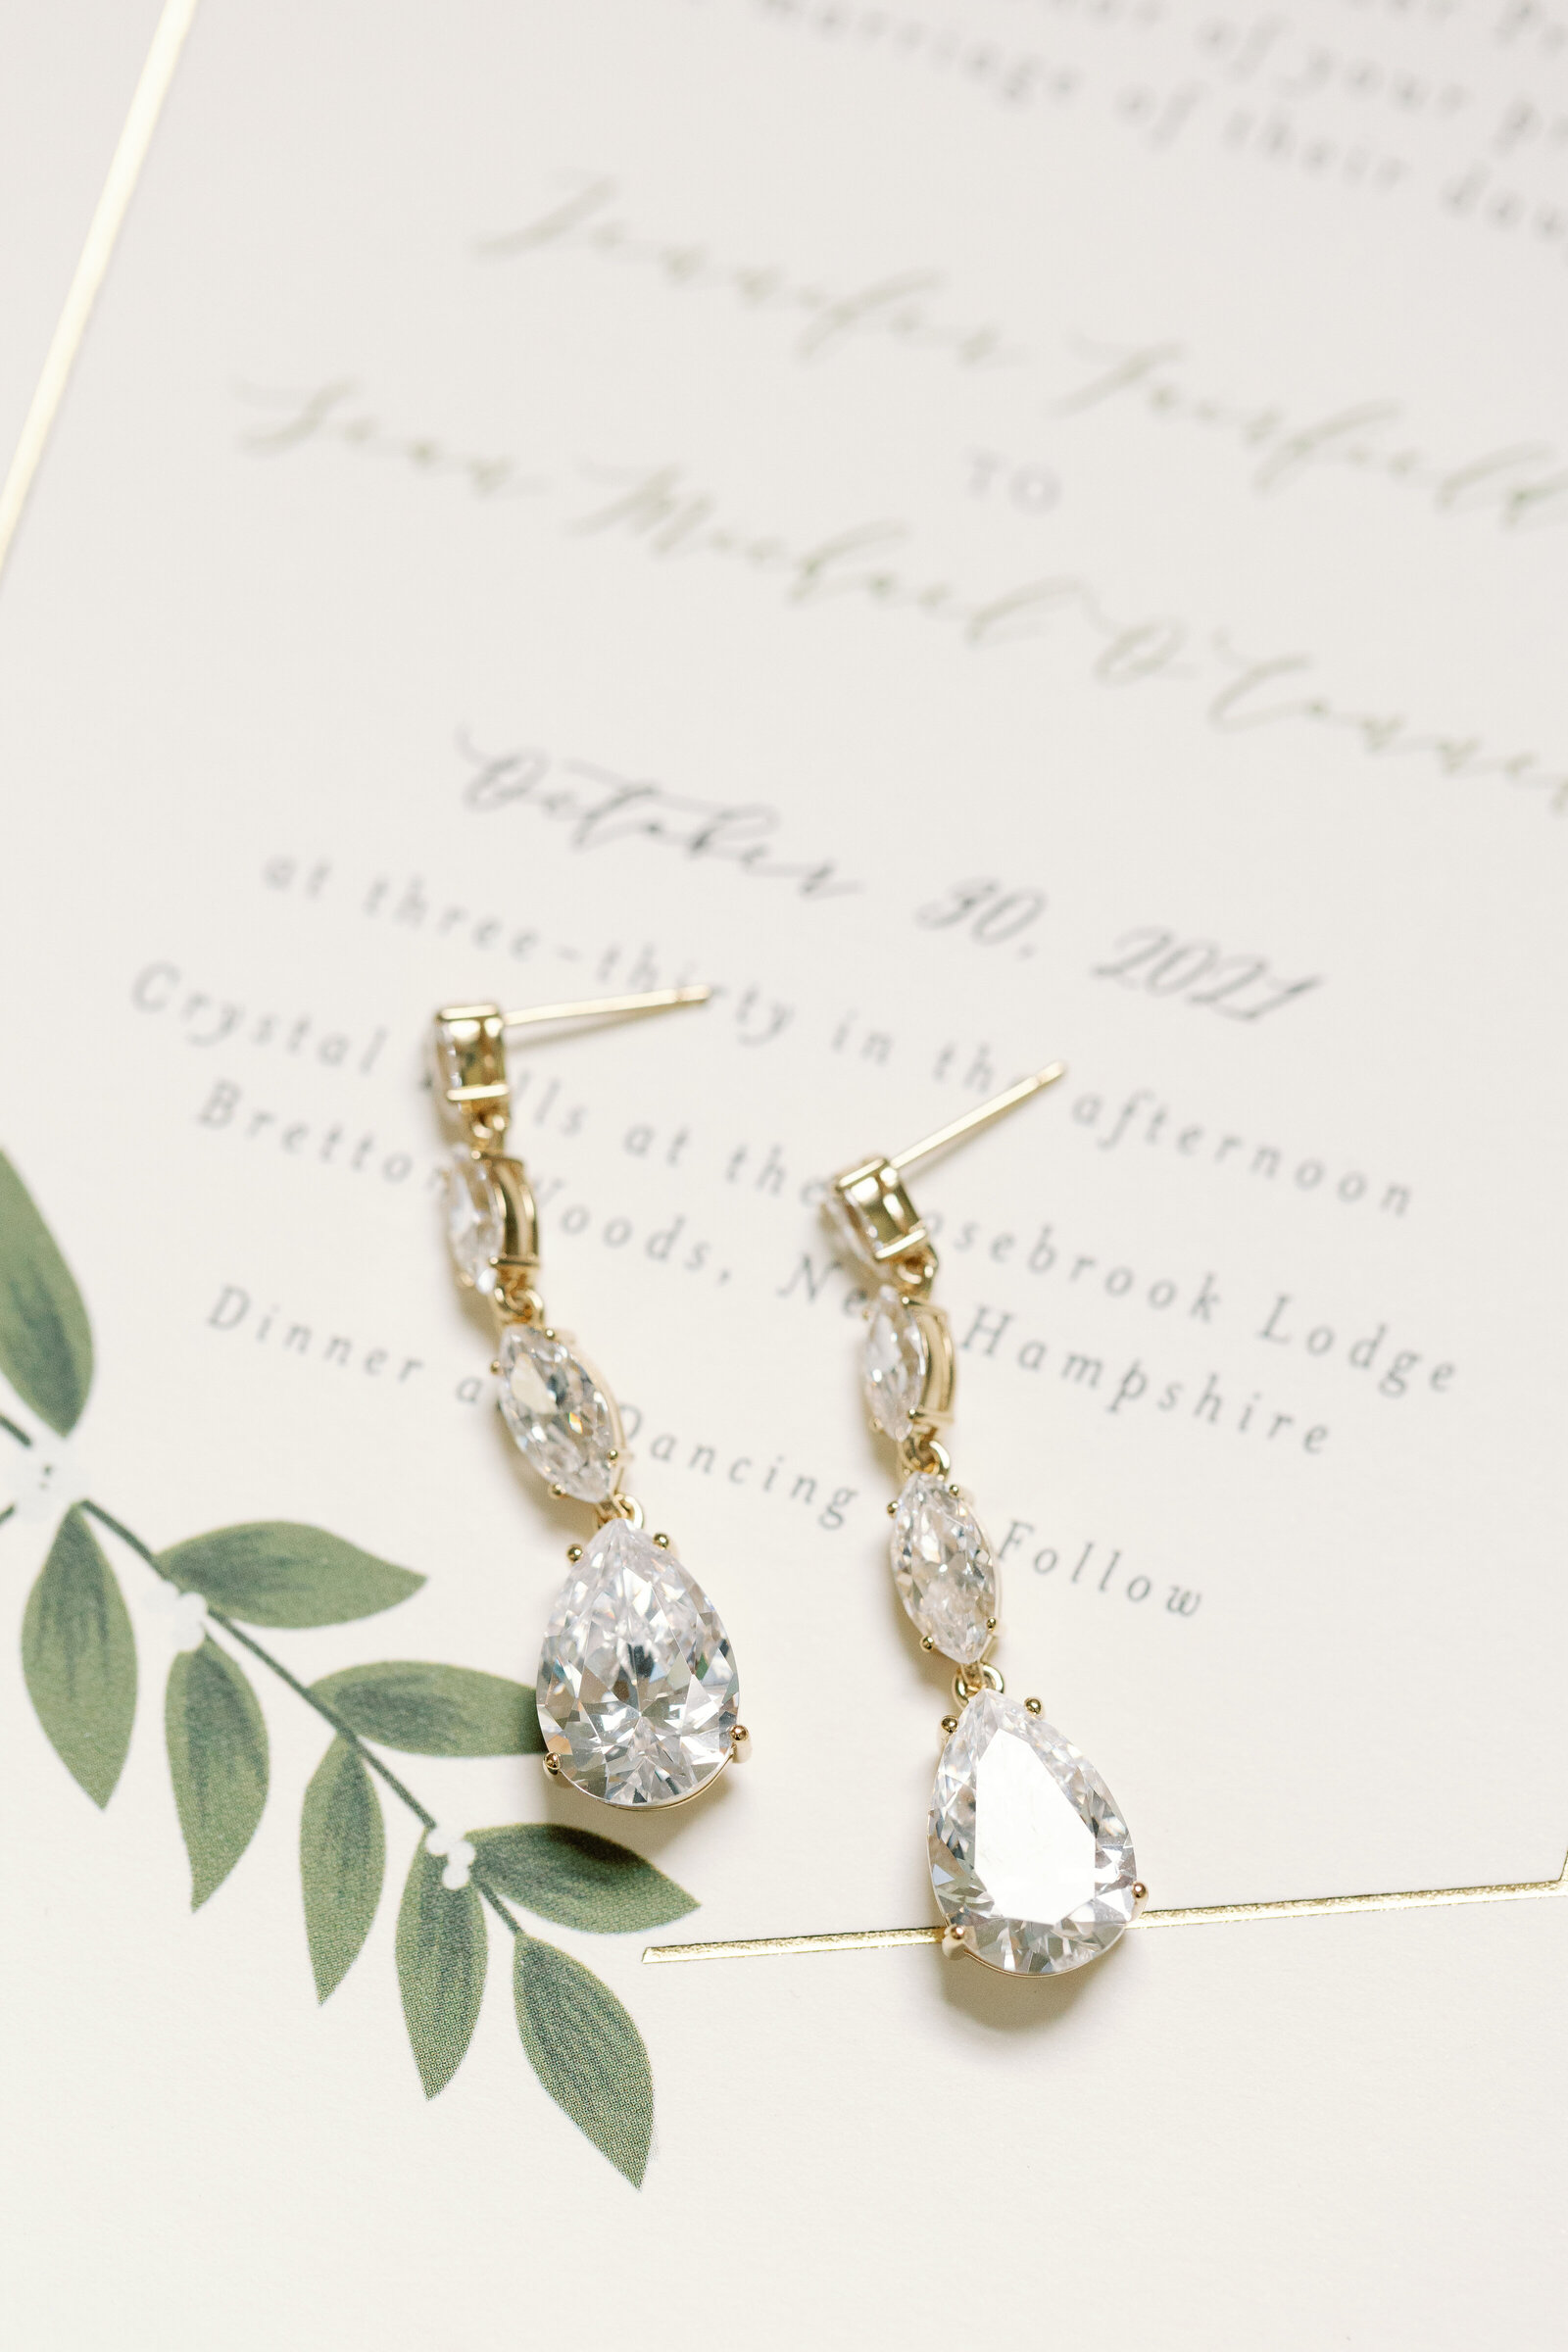 A close up view of earrings laying on a wedding invitation.